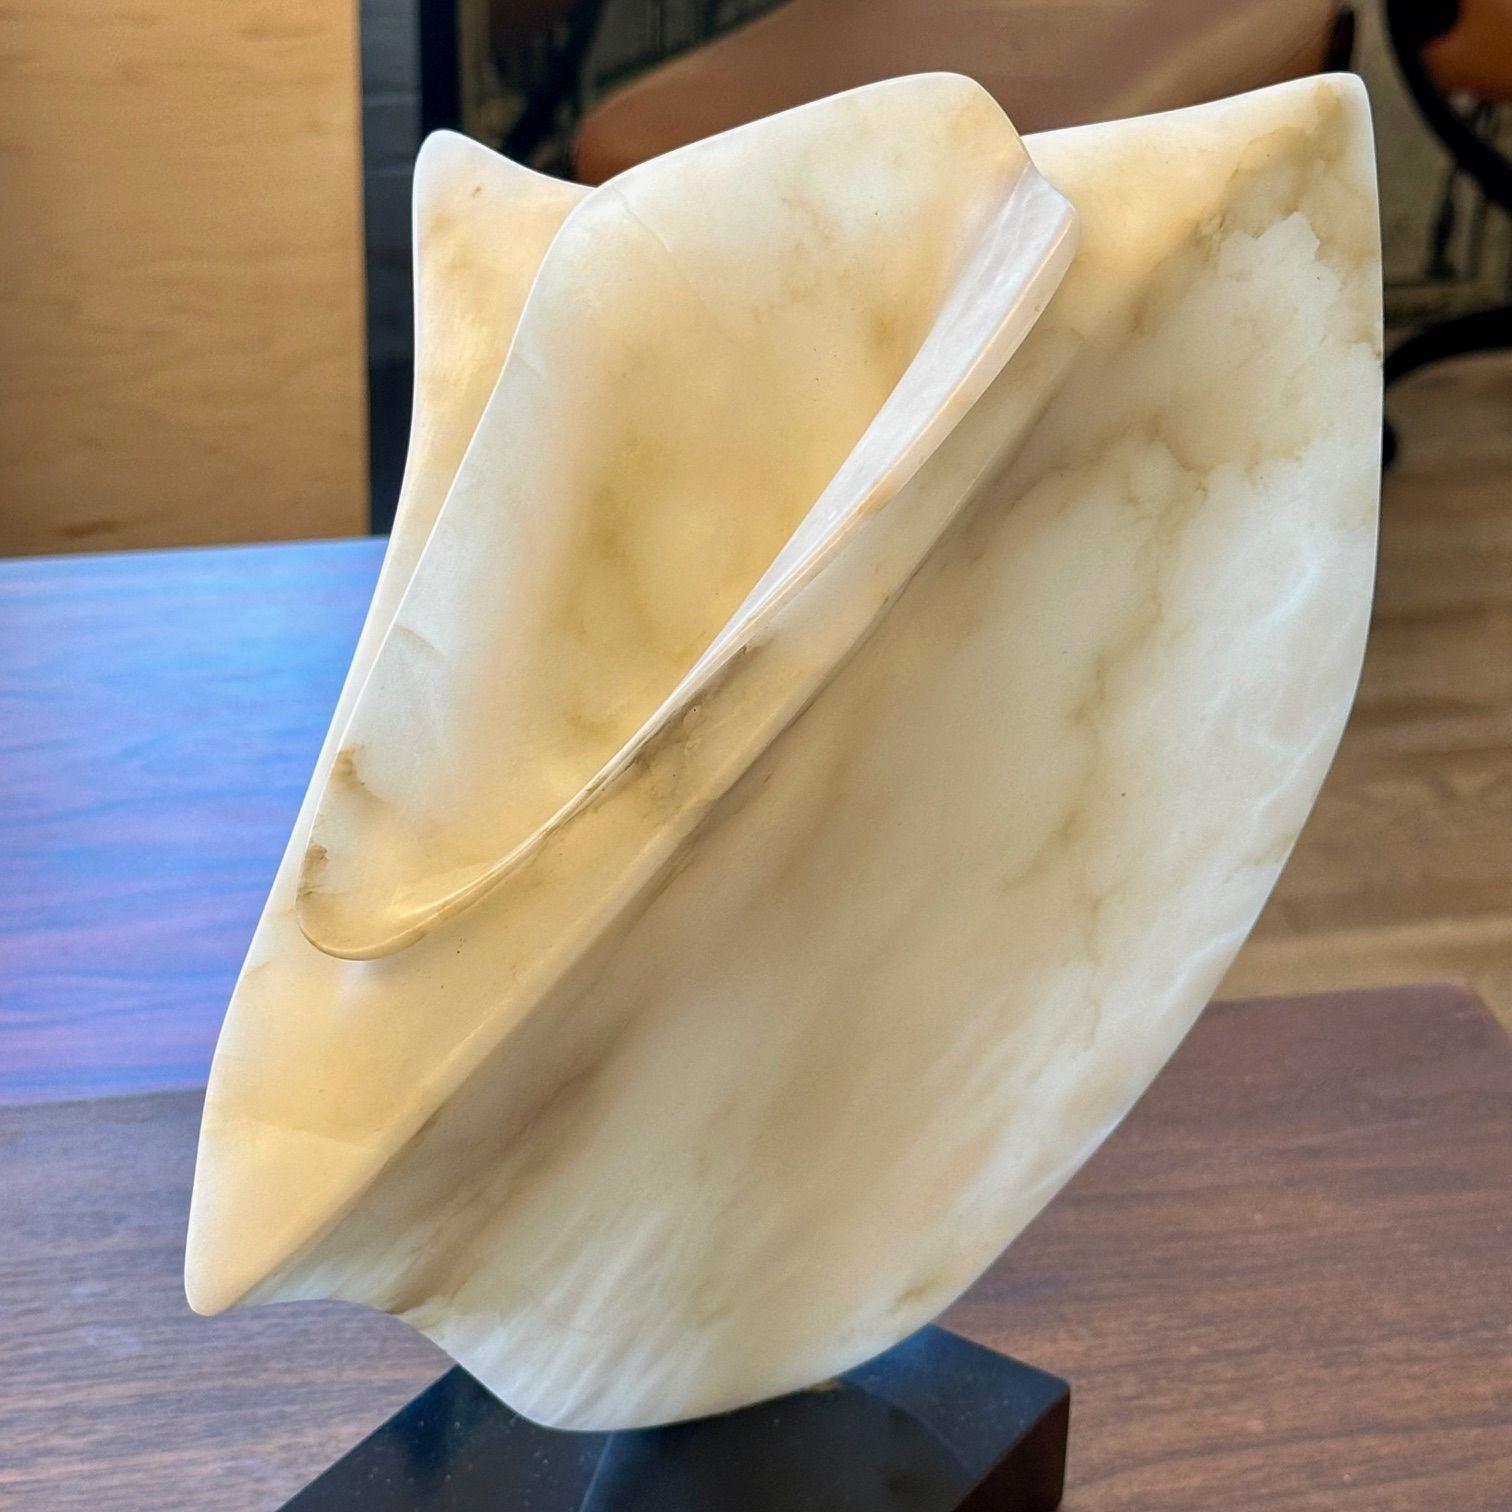 Late 20th Century Contemporary Abstract Stone / Marble Sculpture on Base, Organic Form, 1990s For Sale